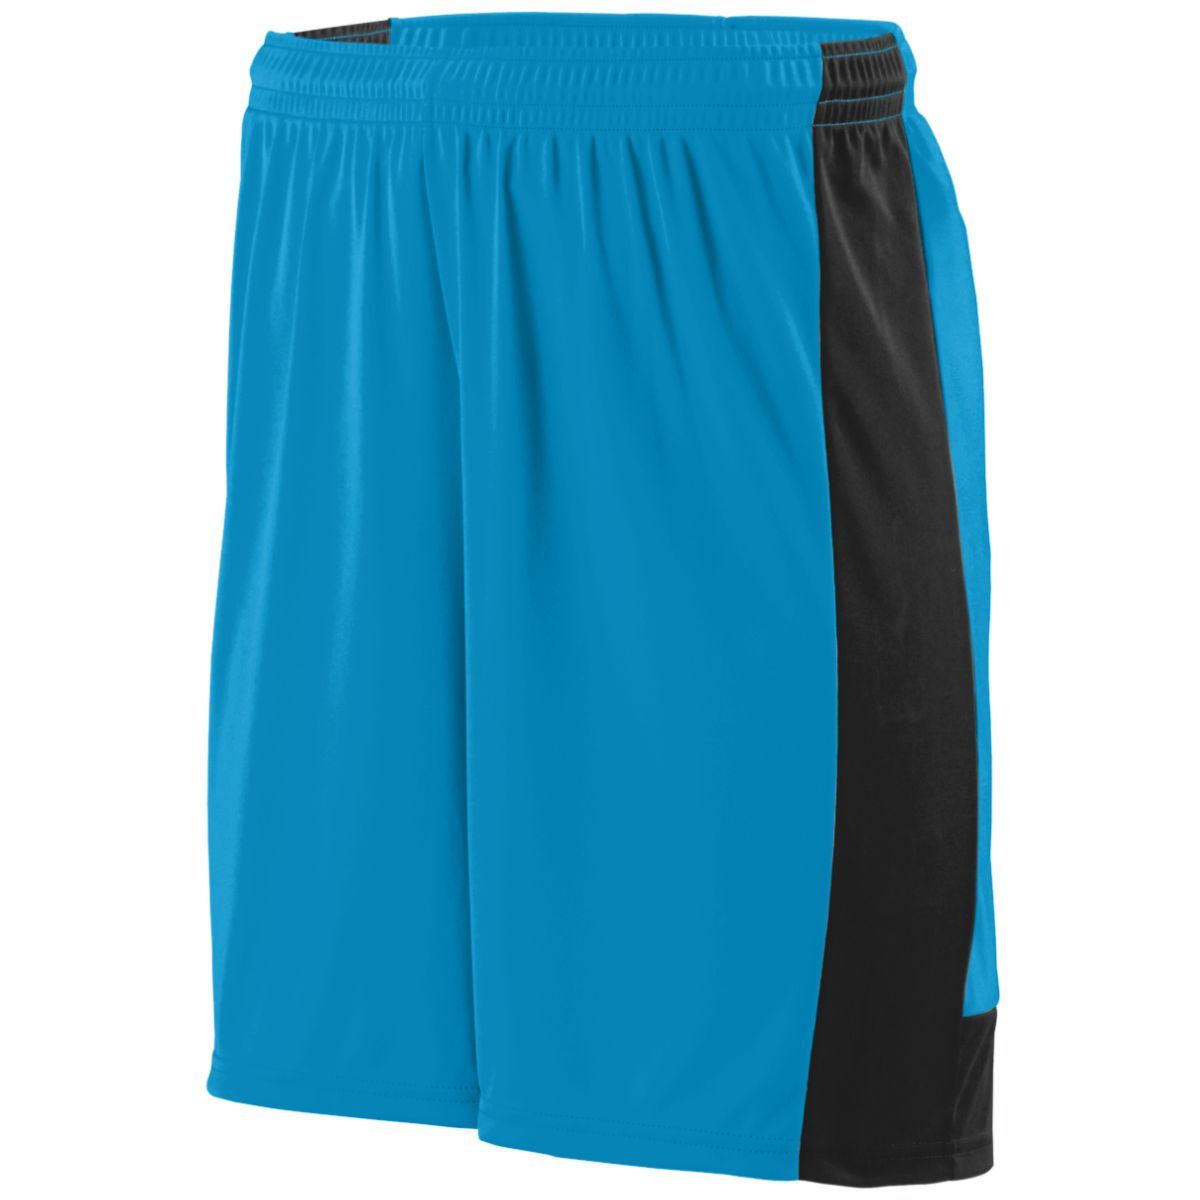 Augusta Sportswear Youth Lightning Shorts in Power Blue/Black  -Part of the Youth, Youth-Shorts, Augusta-Products, Soccer, All-Sports-1 product lines at KanaleyCreations.com